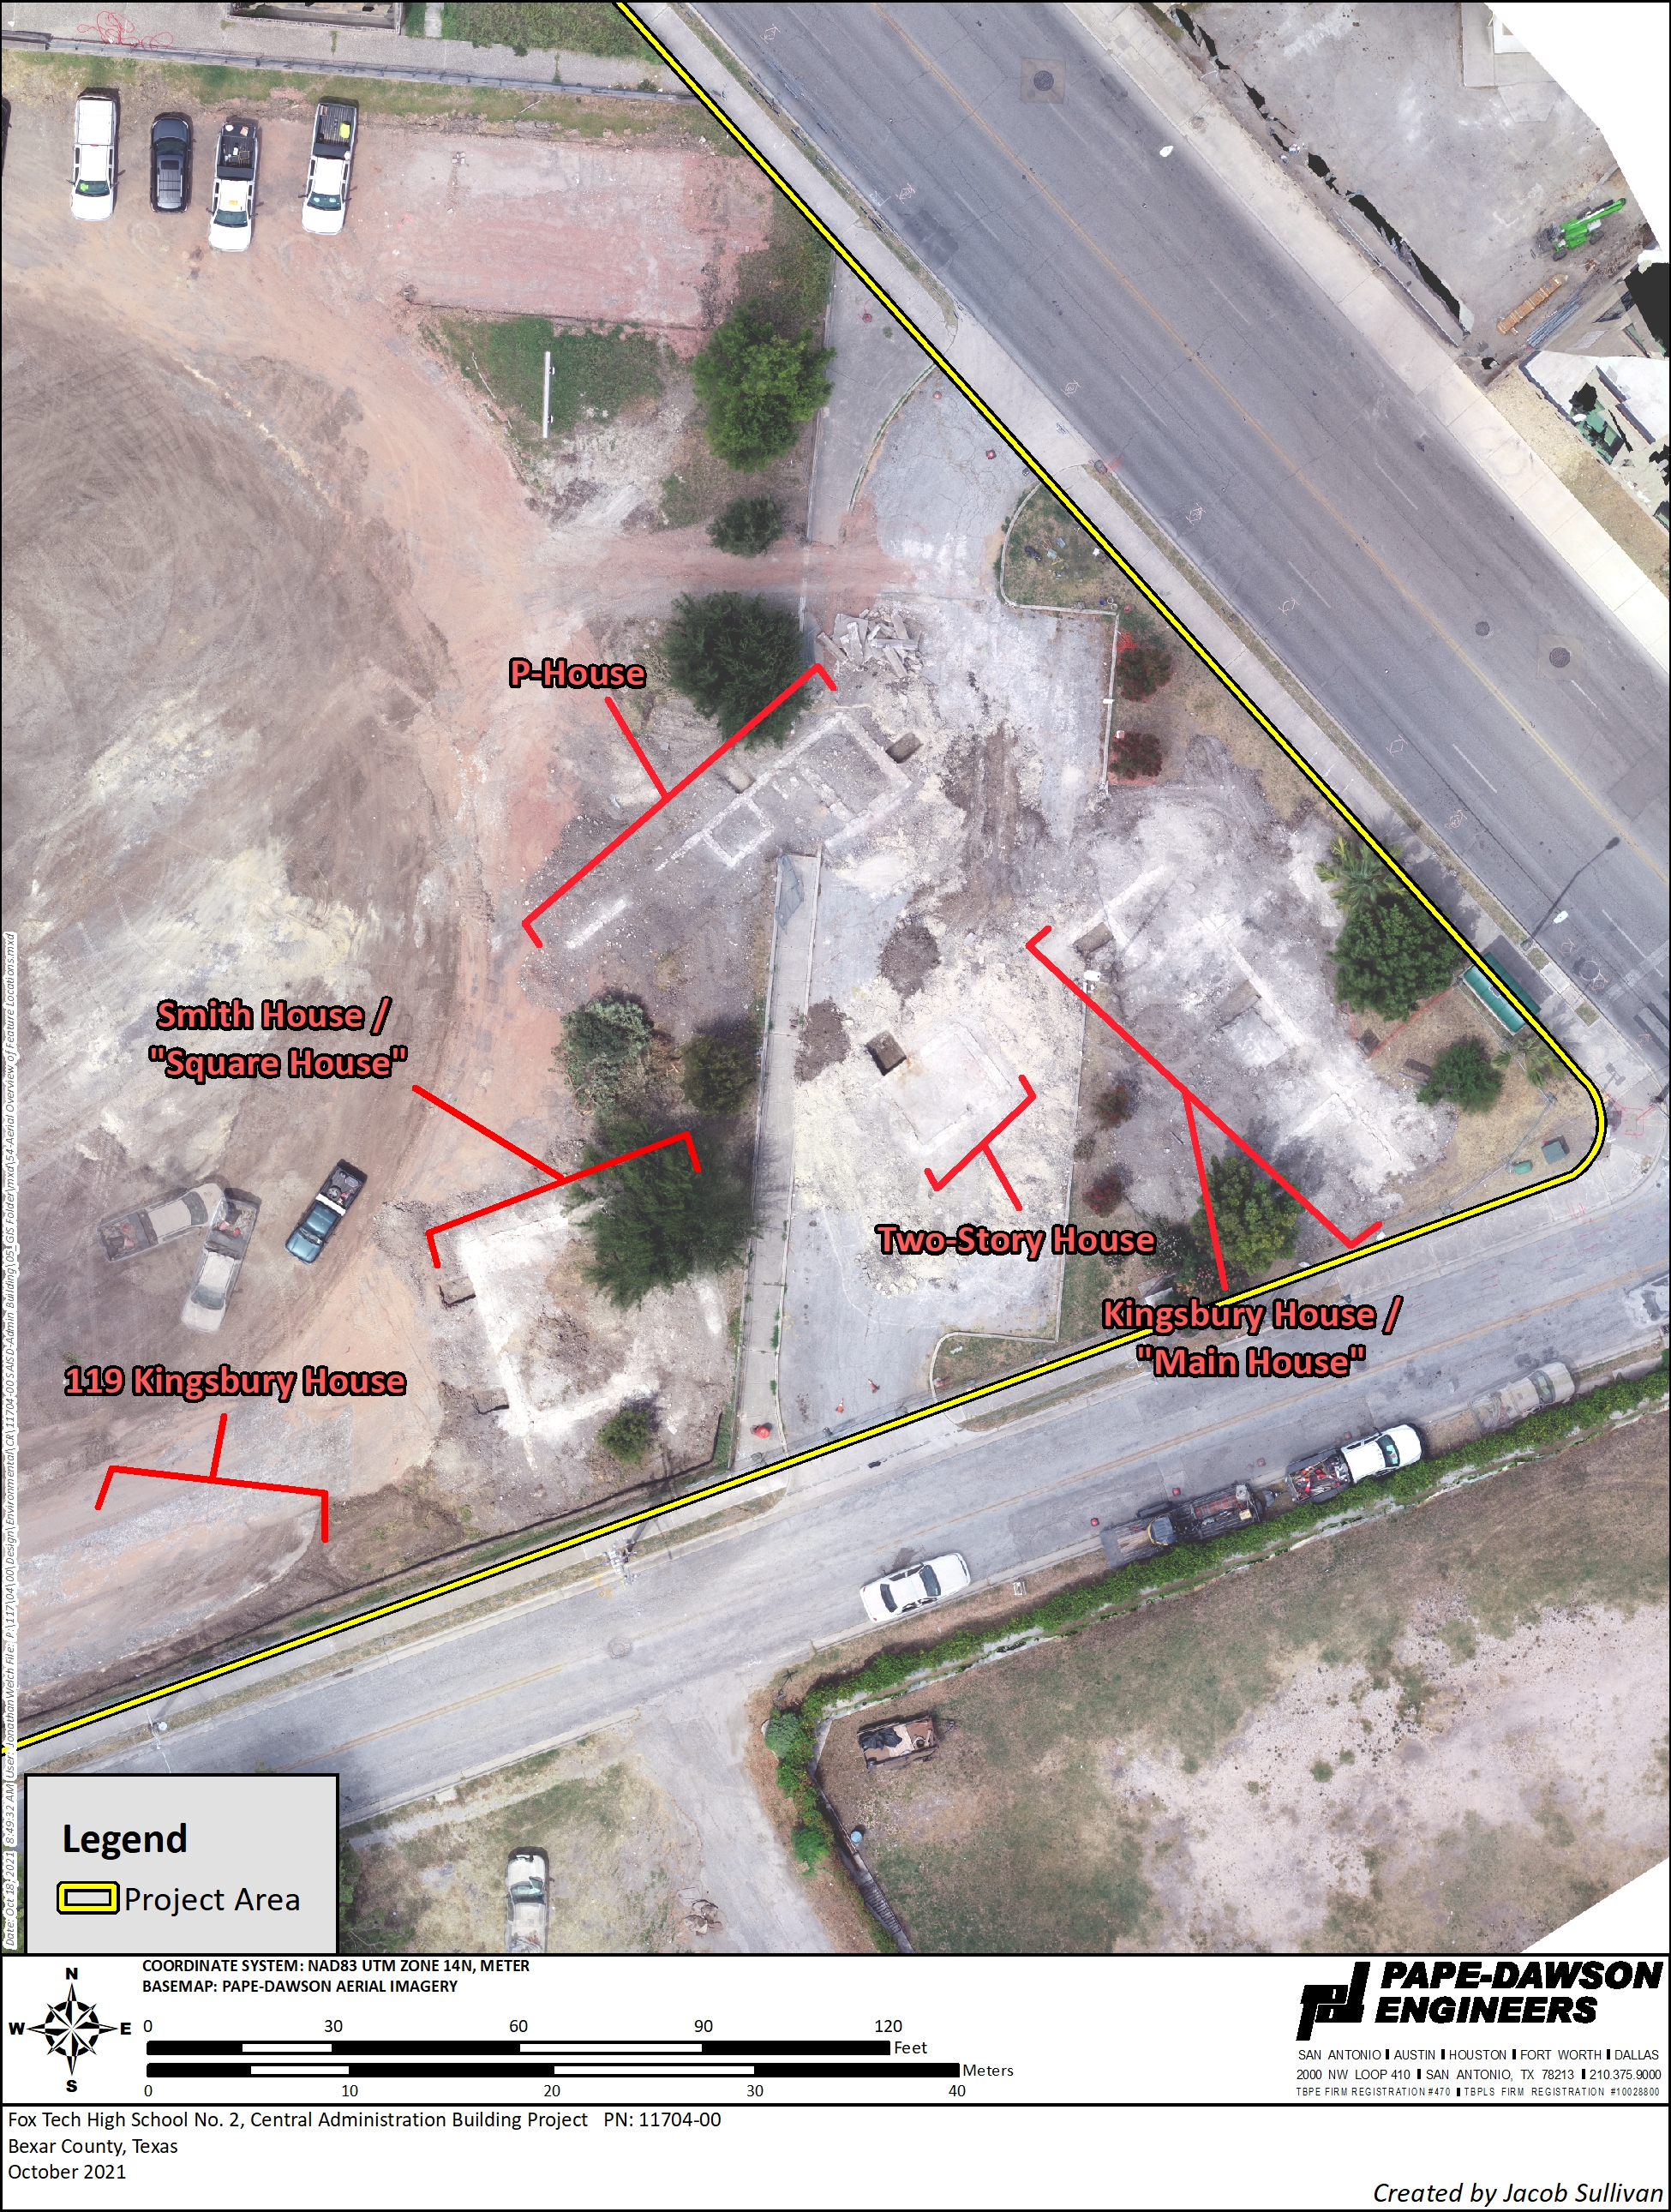 color aerial image marked with labels and outlines of house foundations and other features